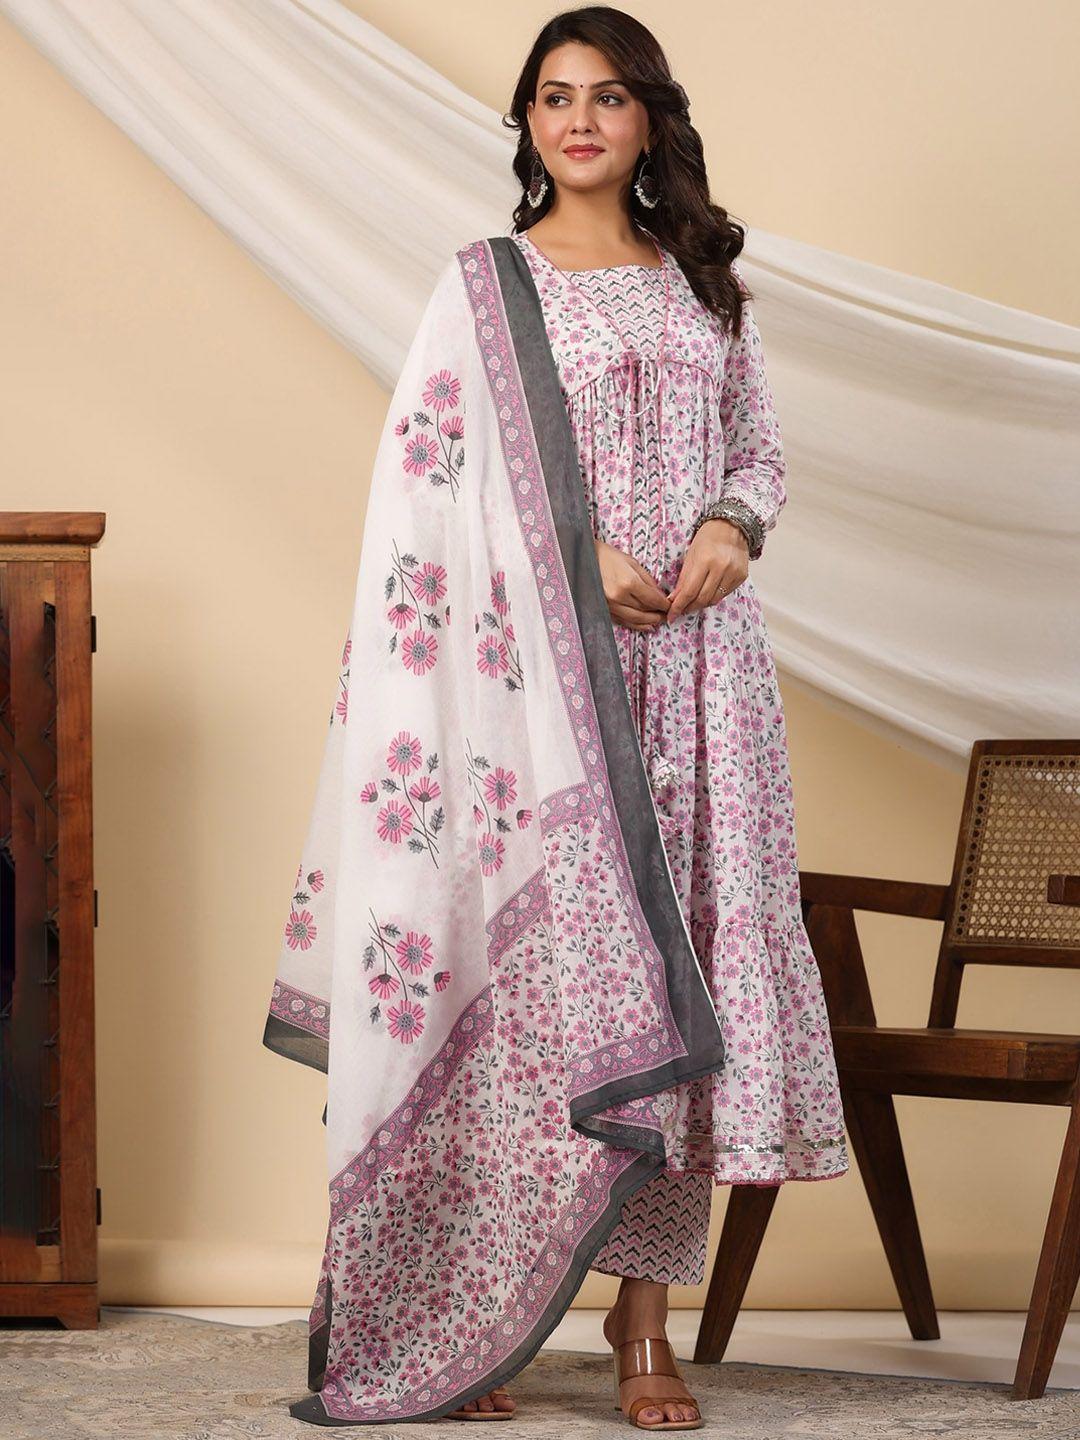 etnicawear floral printed layered pure cotton kurta with palazzos & dupatta